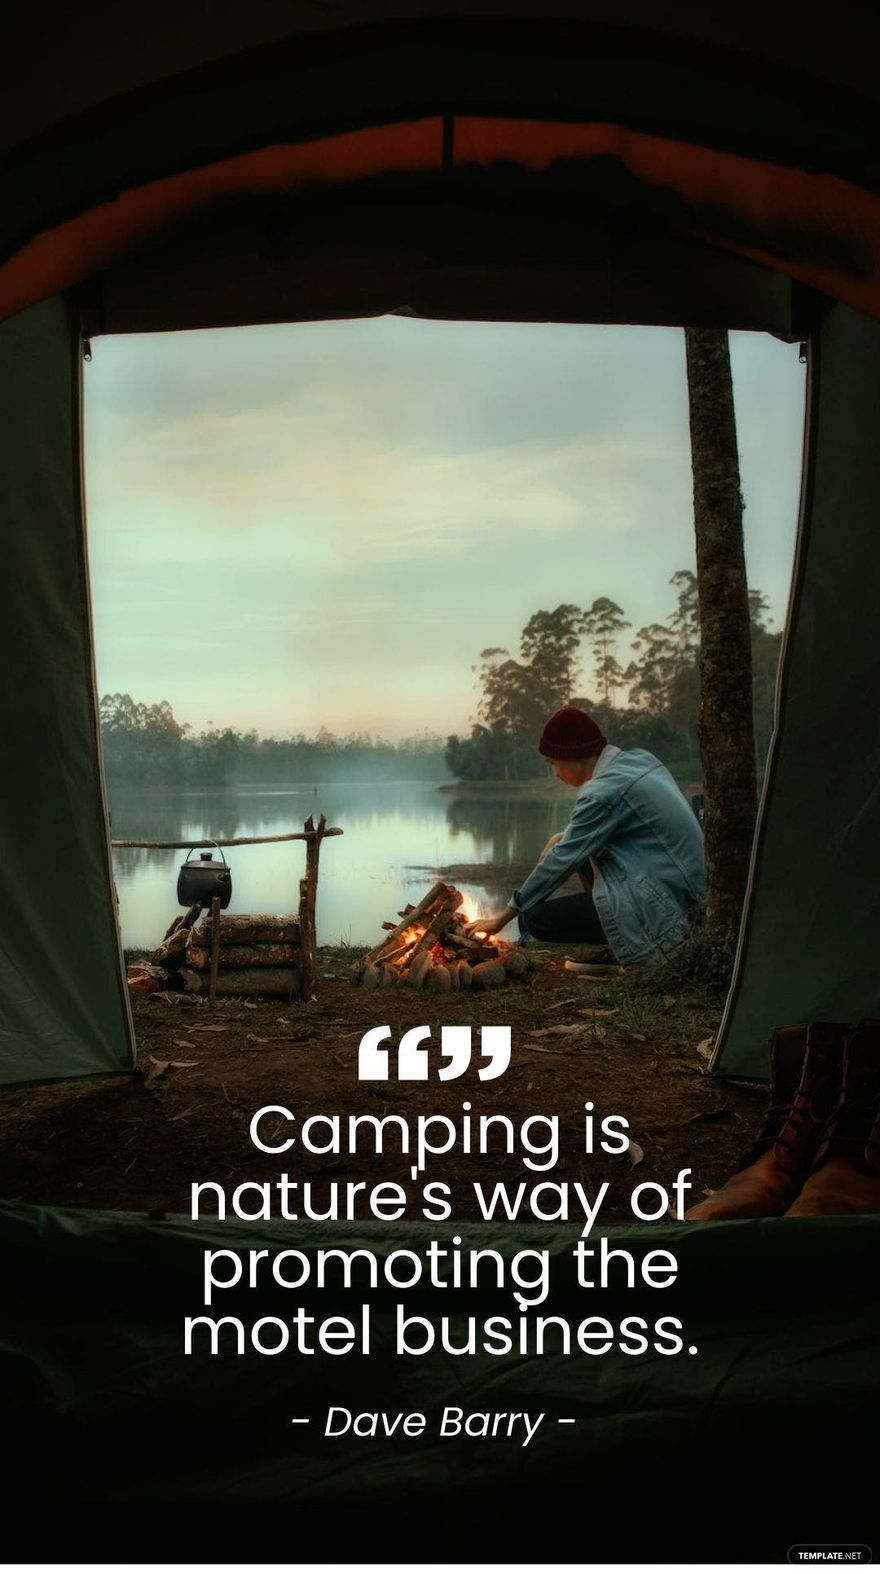 Dave Barry - Camping is nature's way of promoting the motel business.